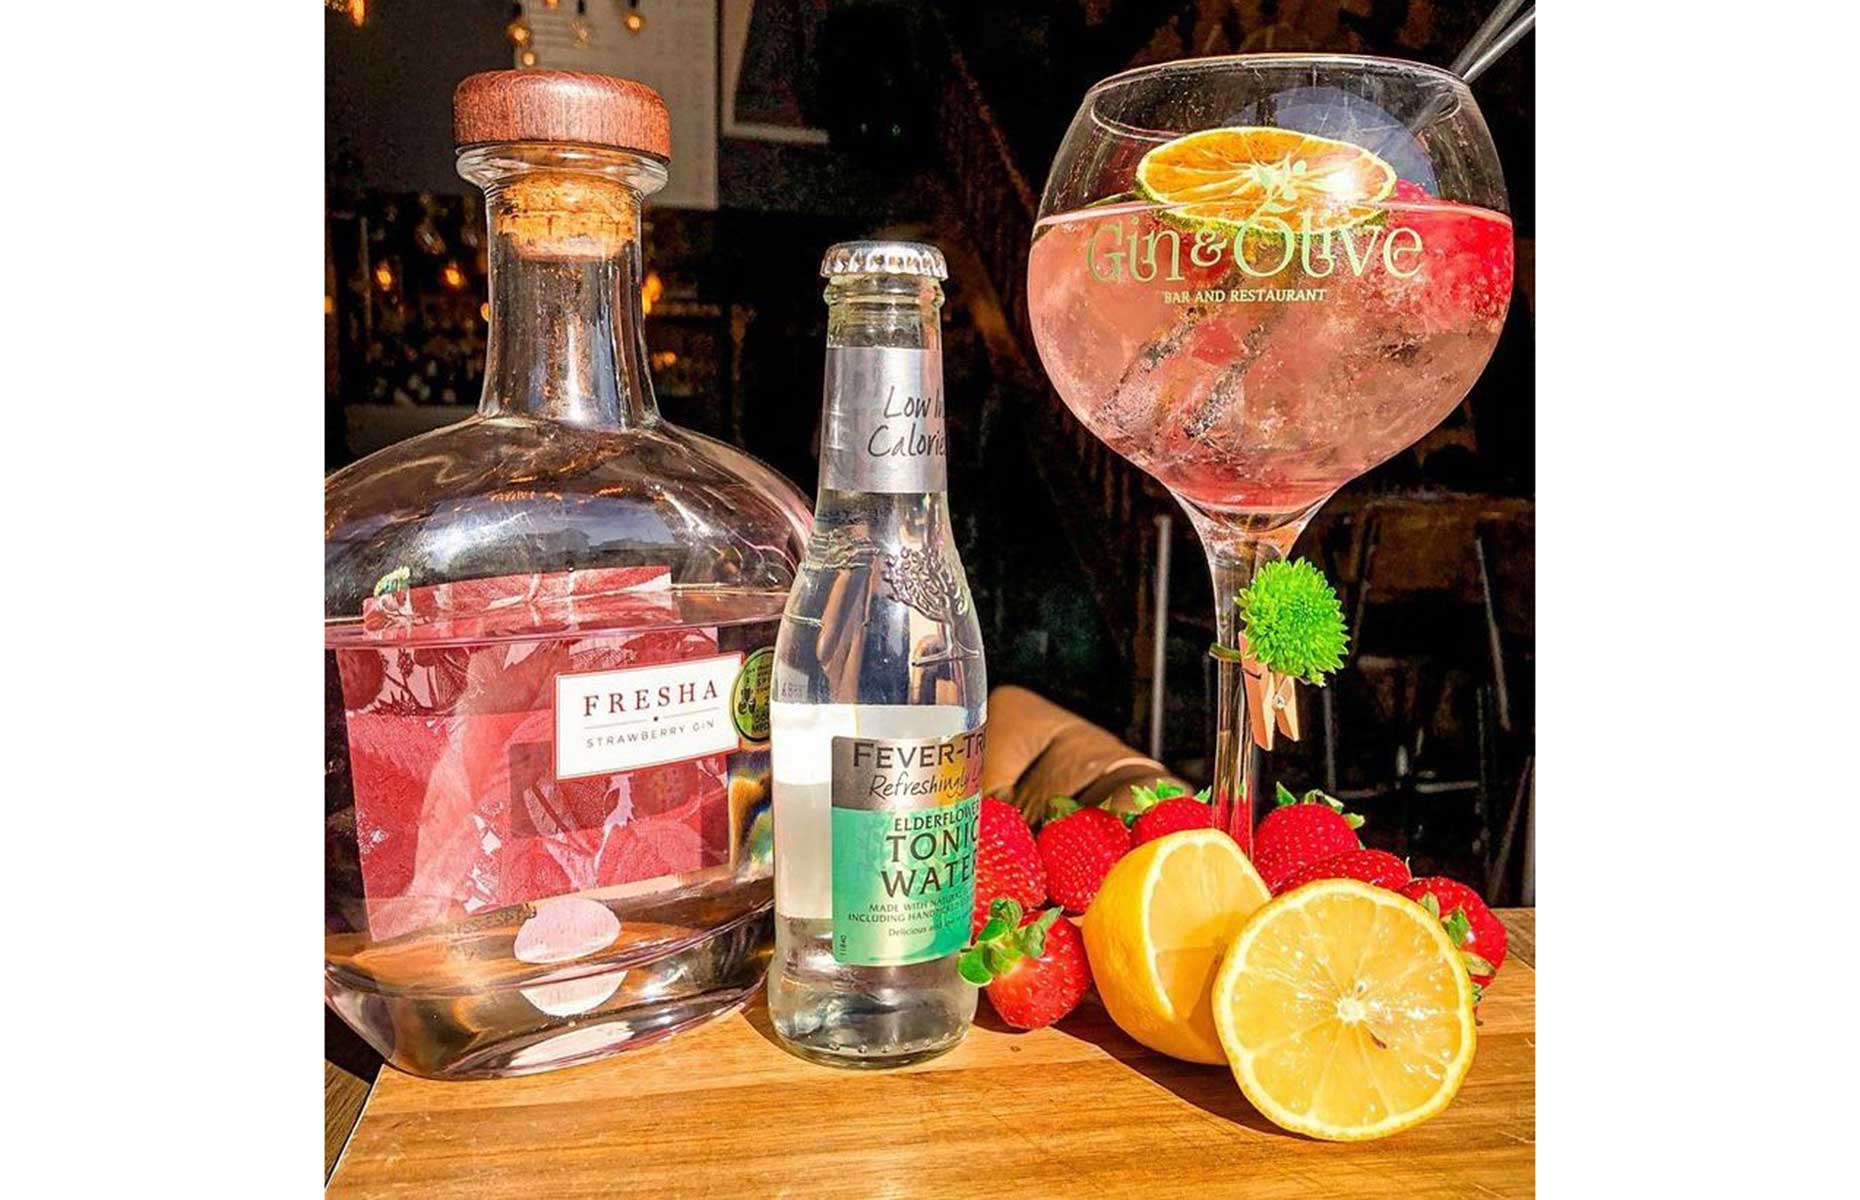 Gin and Olive Portsmouth (Image: Gin and Olive Southsea/Facebook)